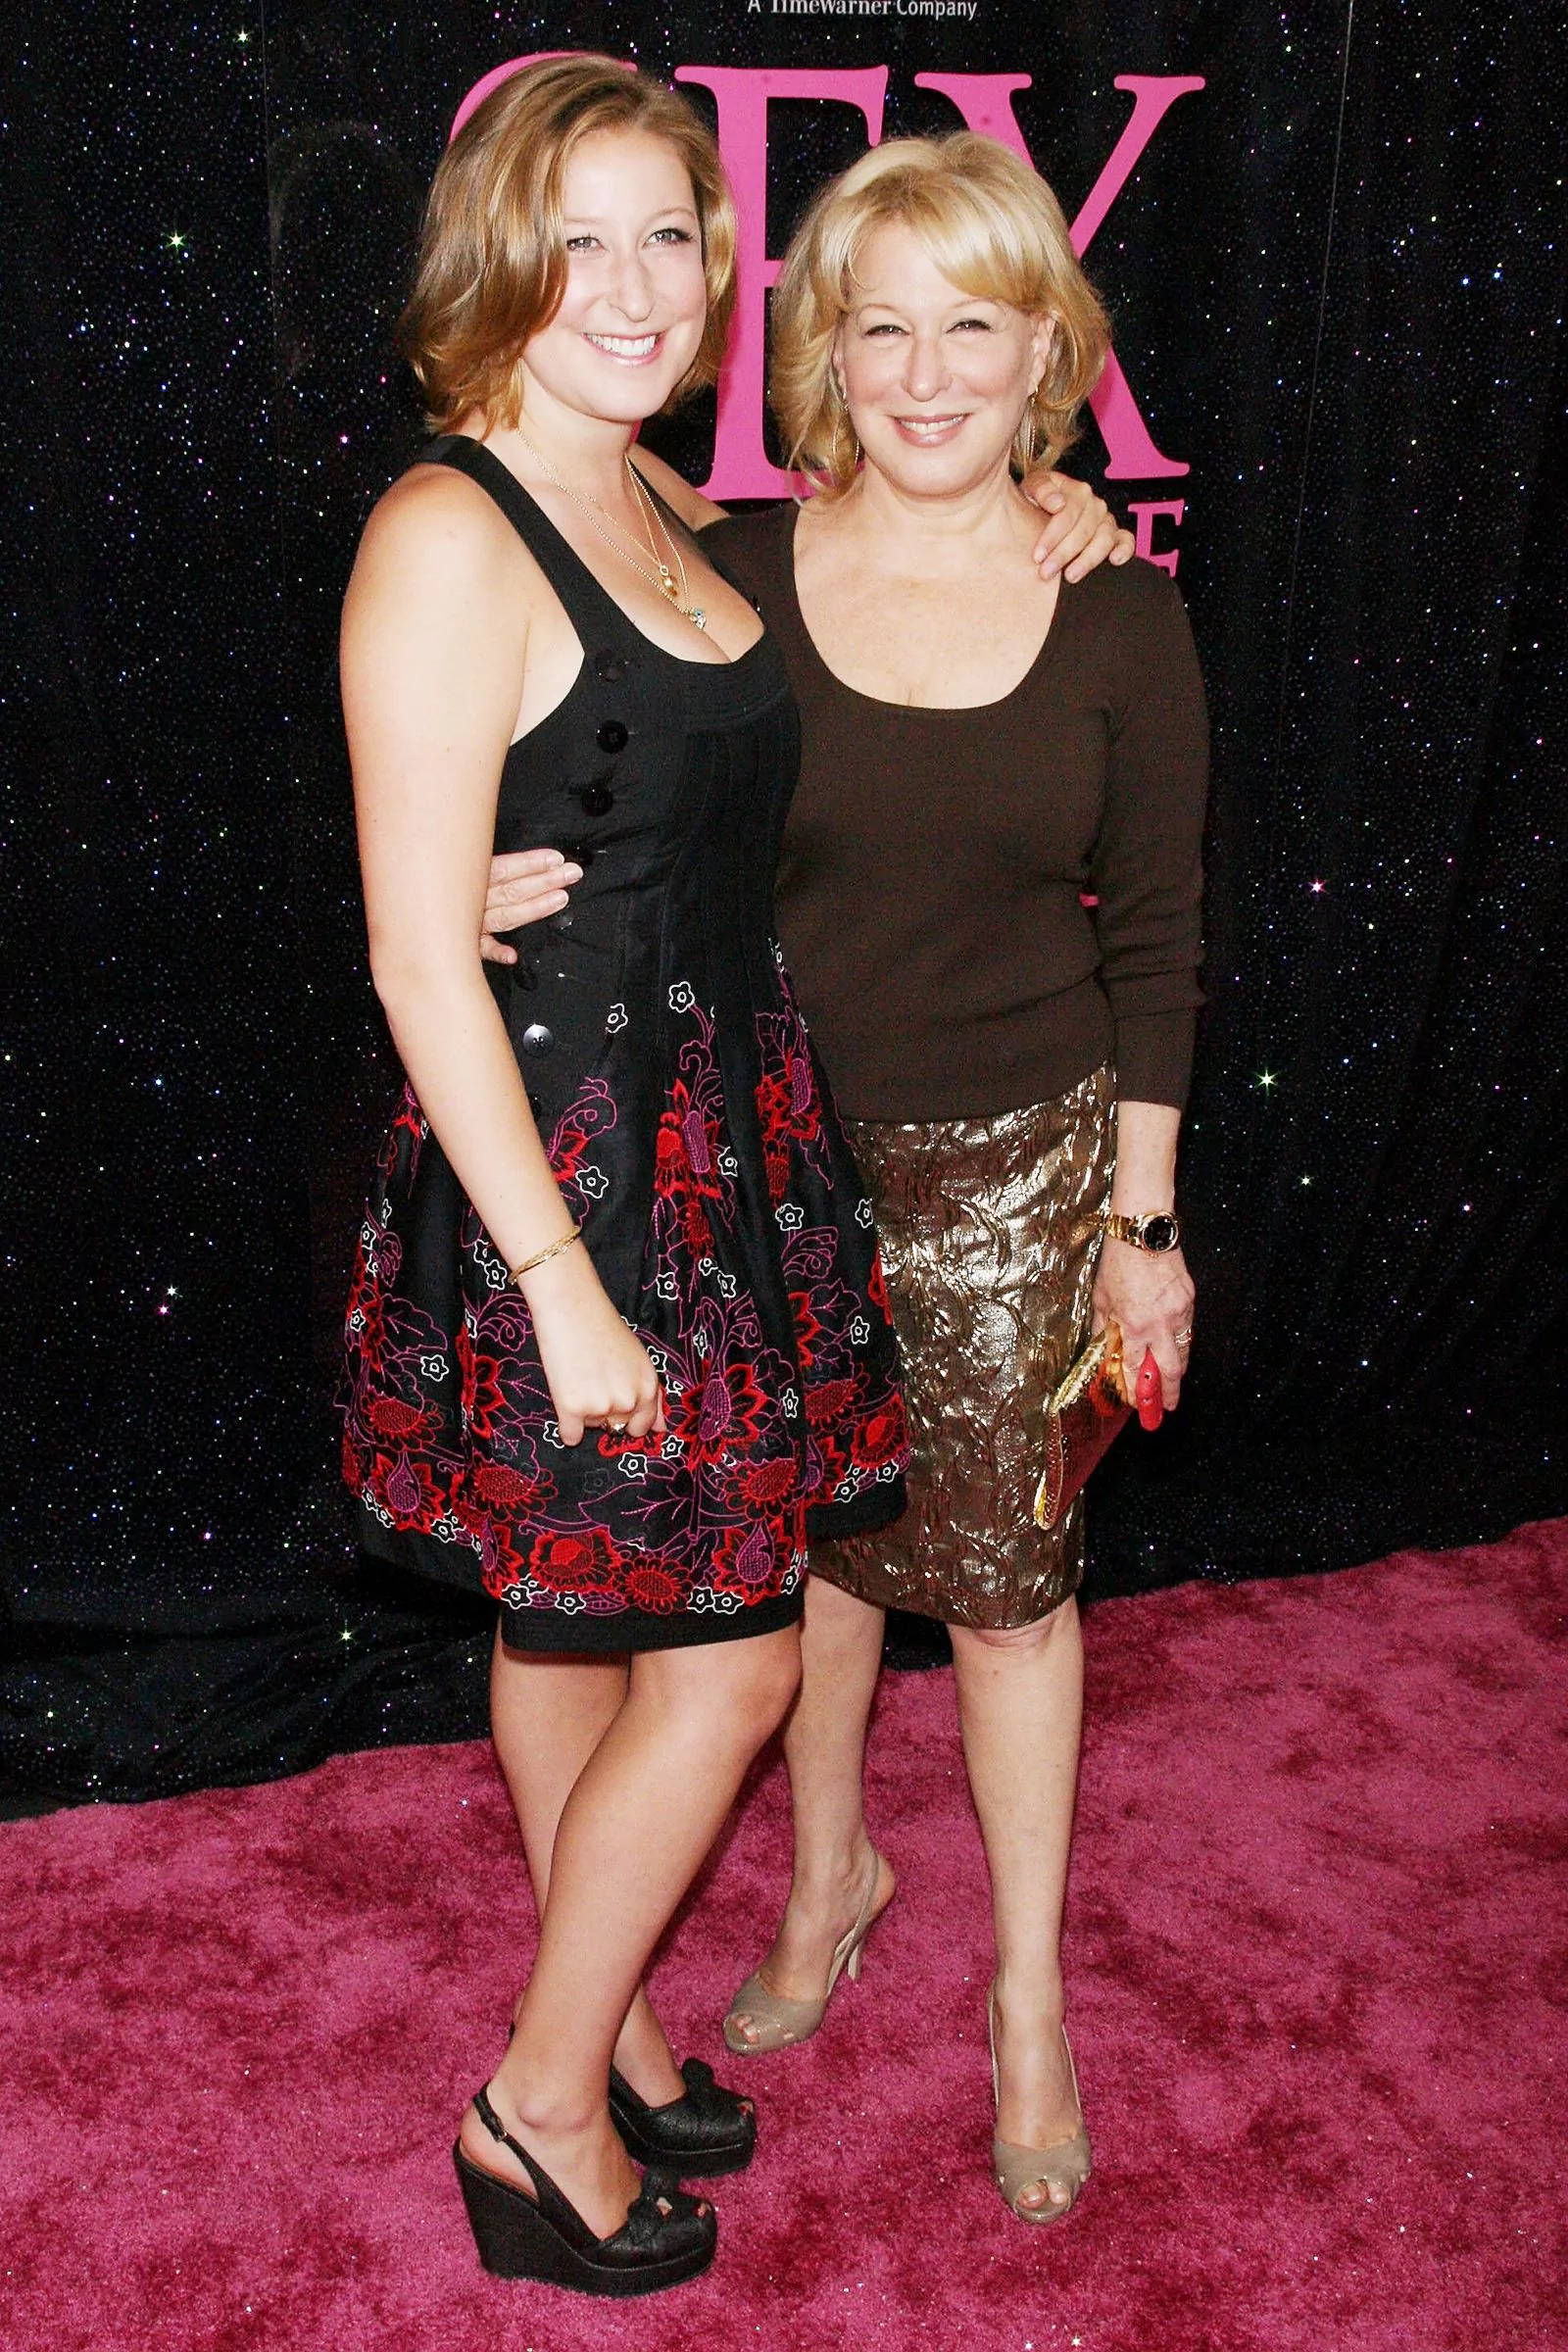 Bette Midler with her daughter Sophie at the premiere of Sex and the City in New York, May 27, 2008.